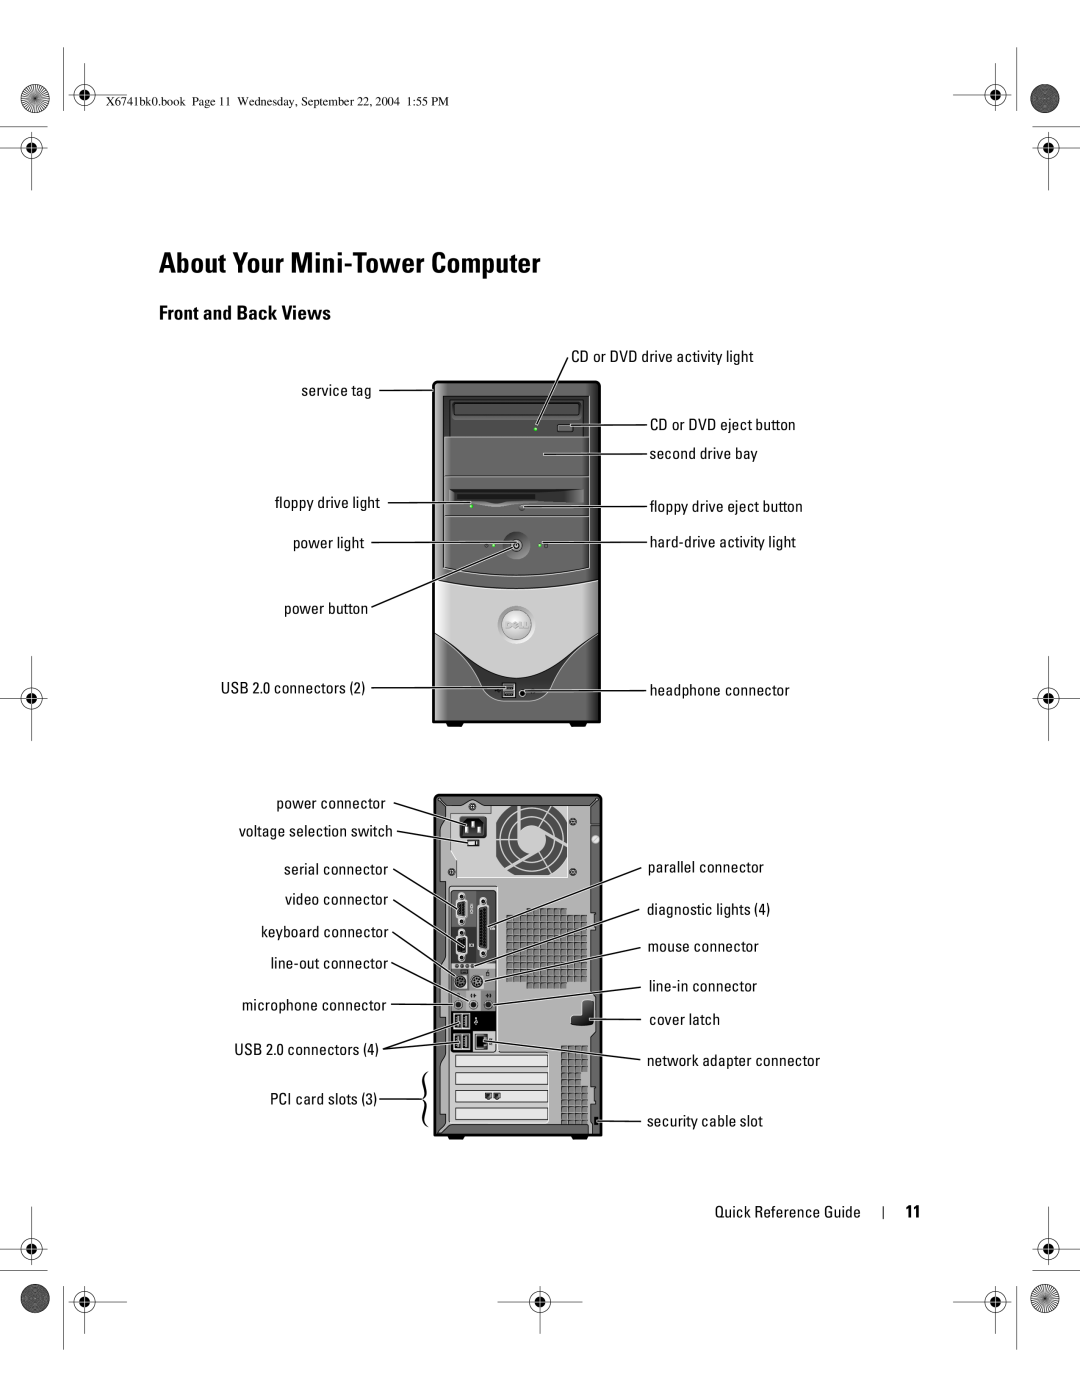 Dell 170L About Your Mini-Tower Computer, Front and Back Views, X6741bk0.book Page 11 Wednesday, September 22, 2004 155 PM 